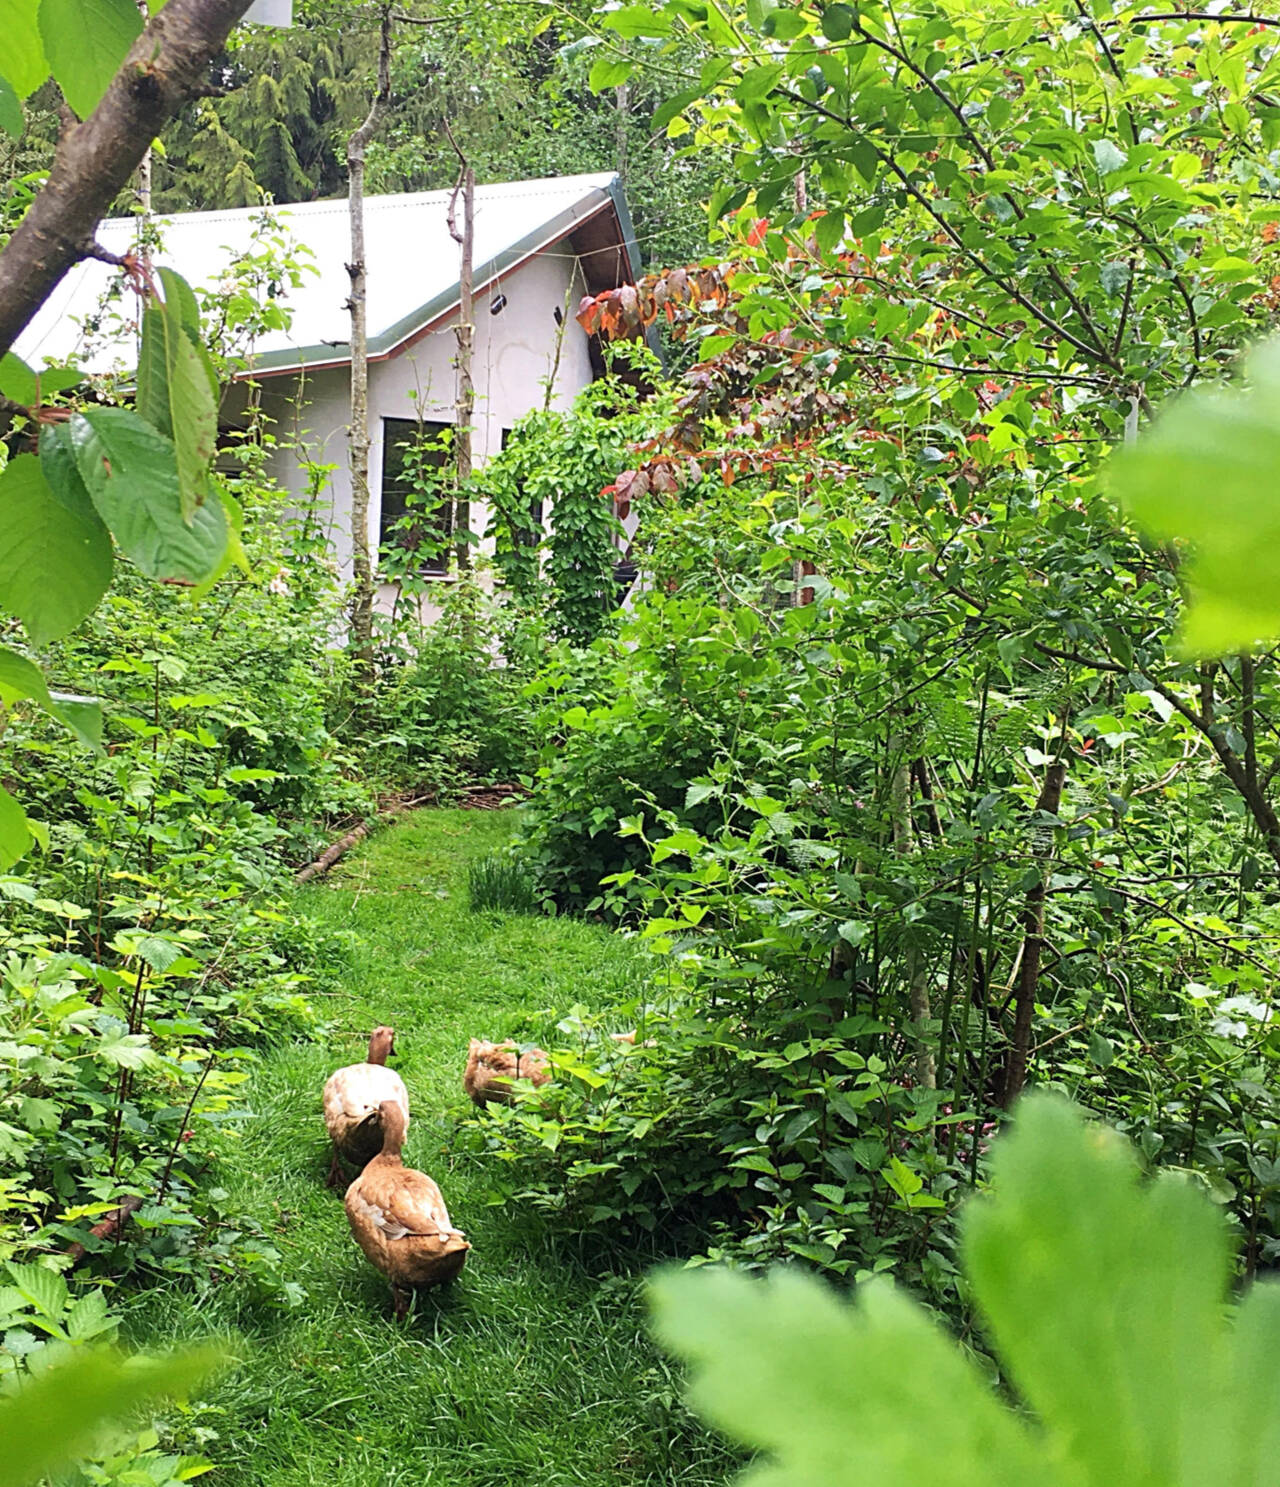 Photo by Karen Teig/Master Gardener Foundation of Clallam County
“A Permaculture Garden” is the fifth stop on the 2022 Petals & Pathways tour, featuring six Port Angels-area gardens.